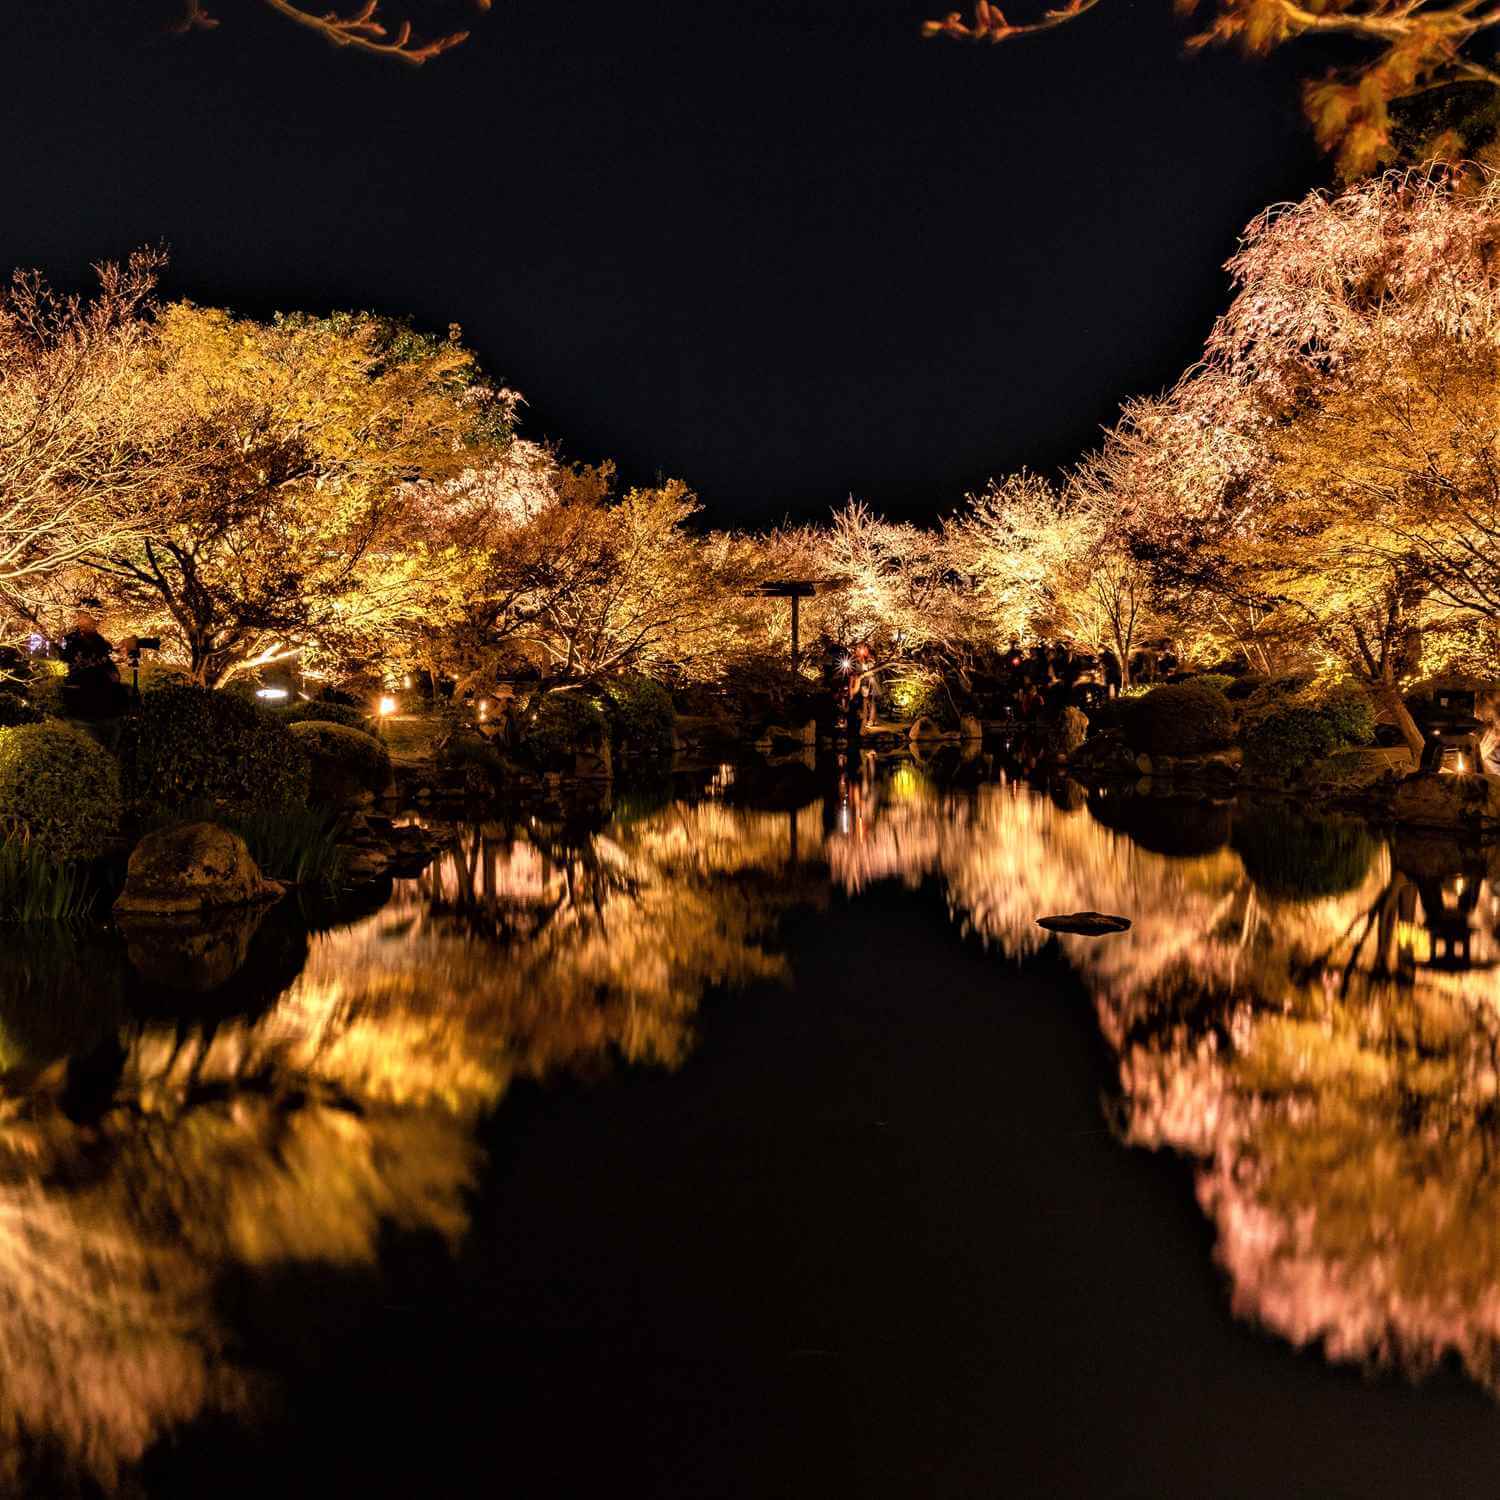 Cherry blossoms in Kyoto = Shutterstock 9